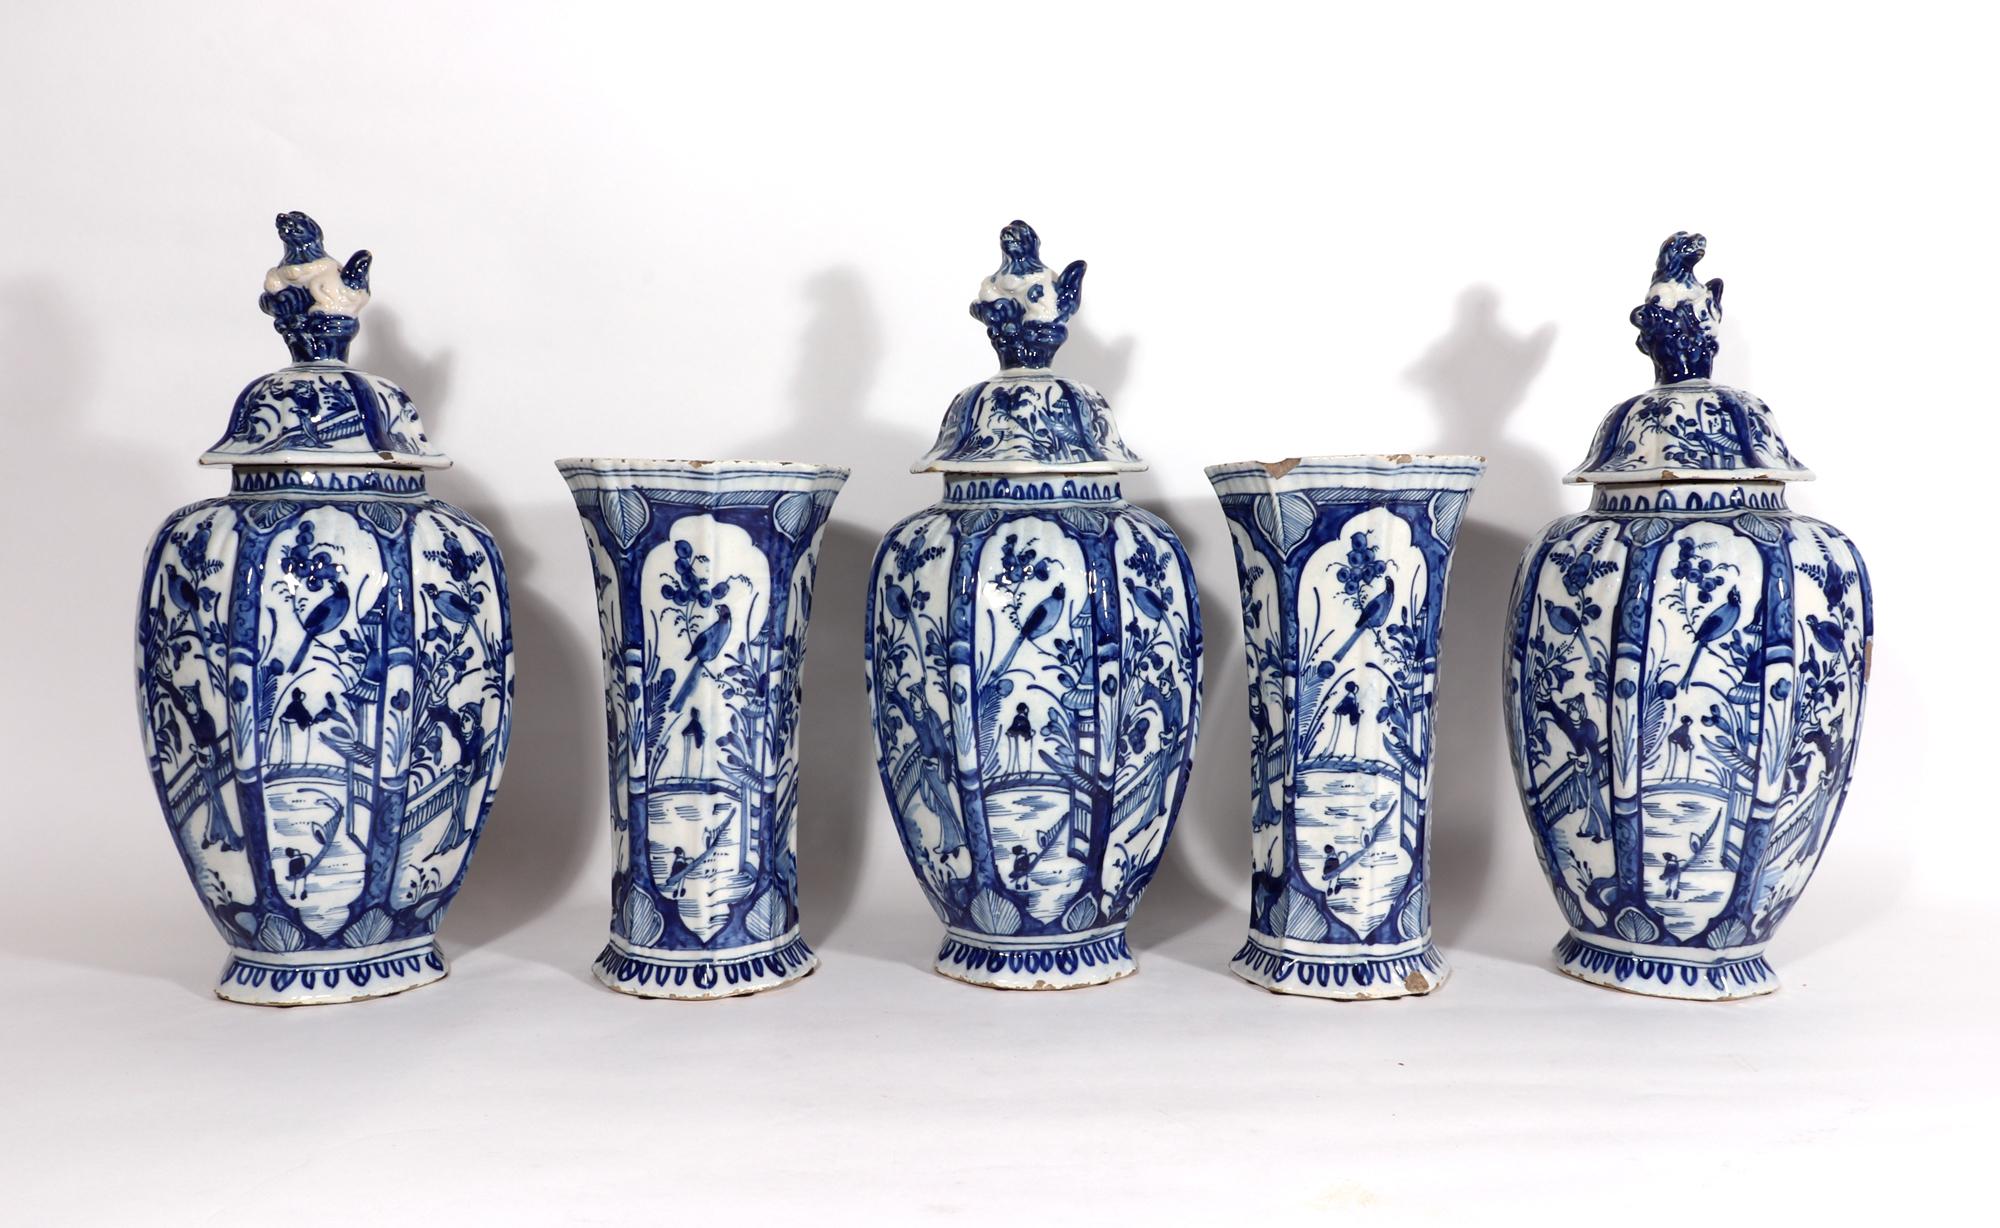 Dutch Delft blue & white chinoiserie Garniture of vases,
circa 1765

The underglaze blue octagonal-shaped vases have alternating panels, one with a Chinese male figure gardening by a fence with a large bird perched above. The other panel with a